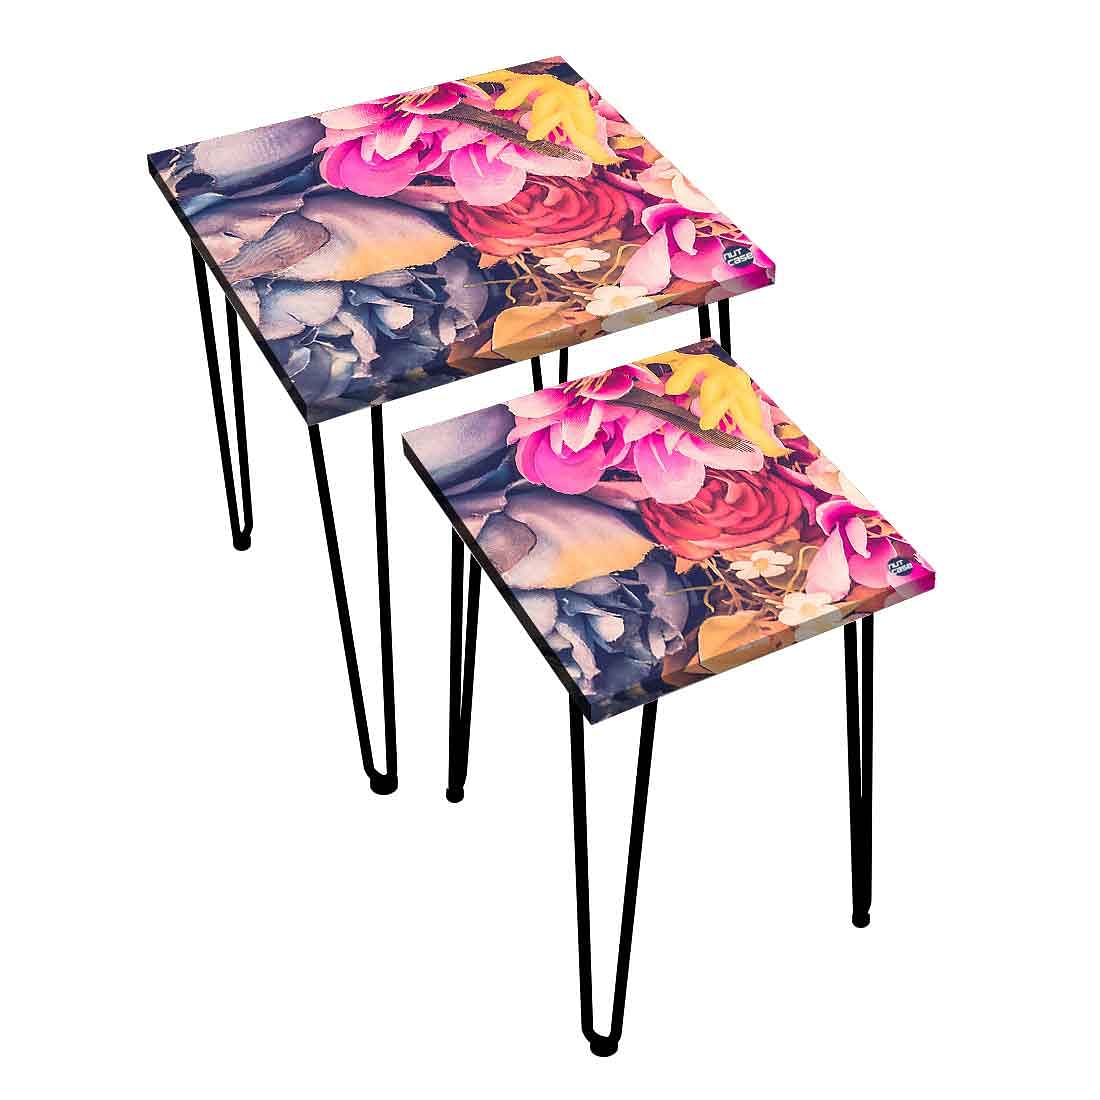 Nesting Side Table Set of 2 in a Floral Design Online in India Nutcase